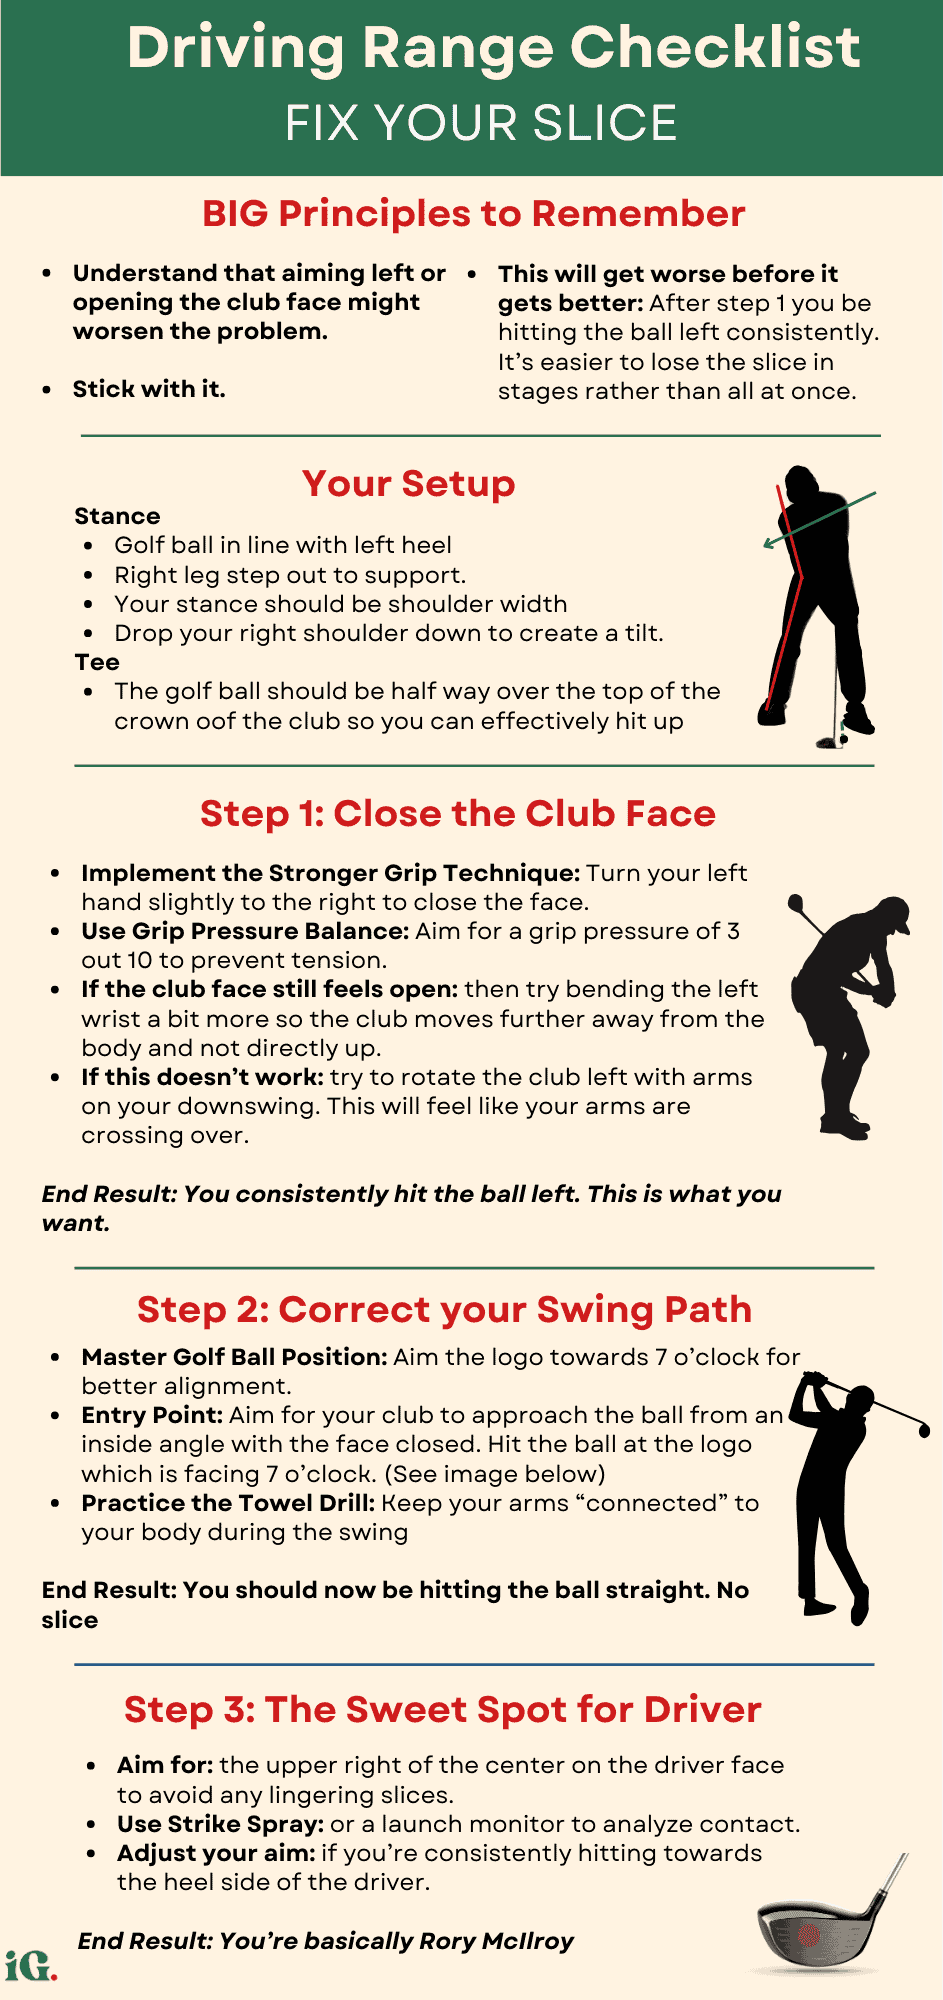 An infographic showing the three simple steps to stop slicing your golf driver